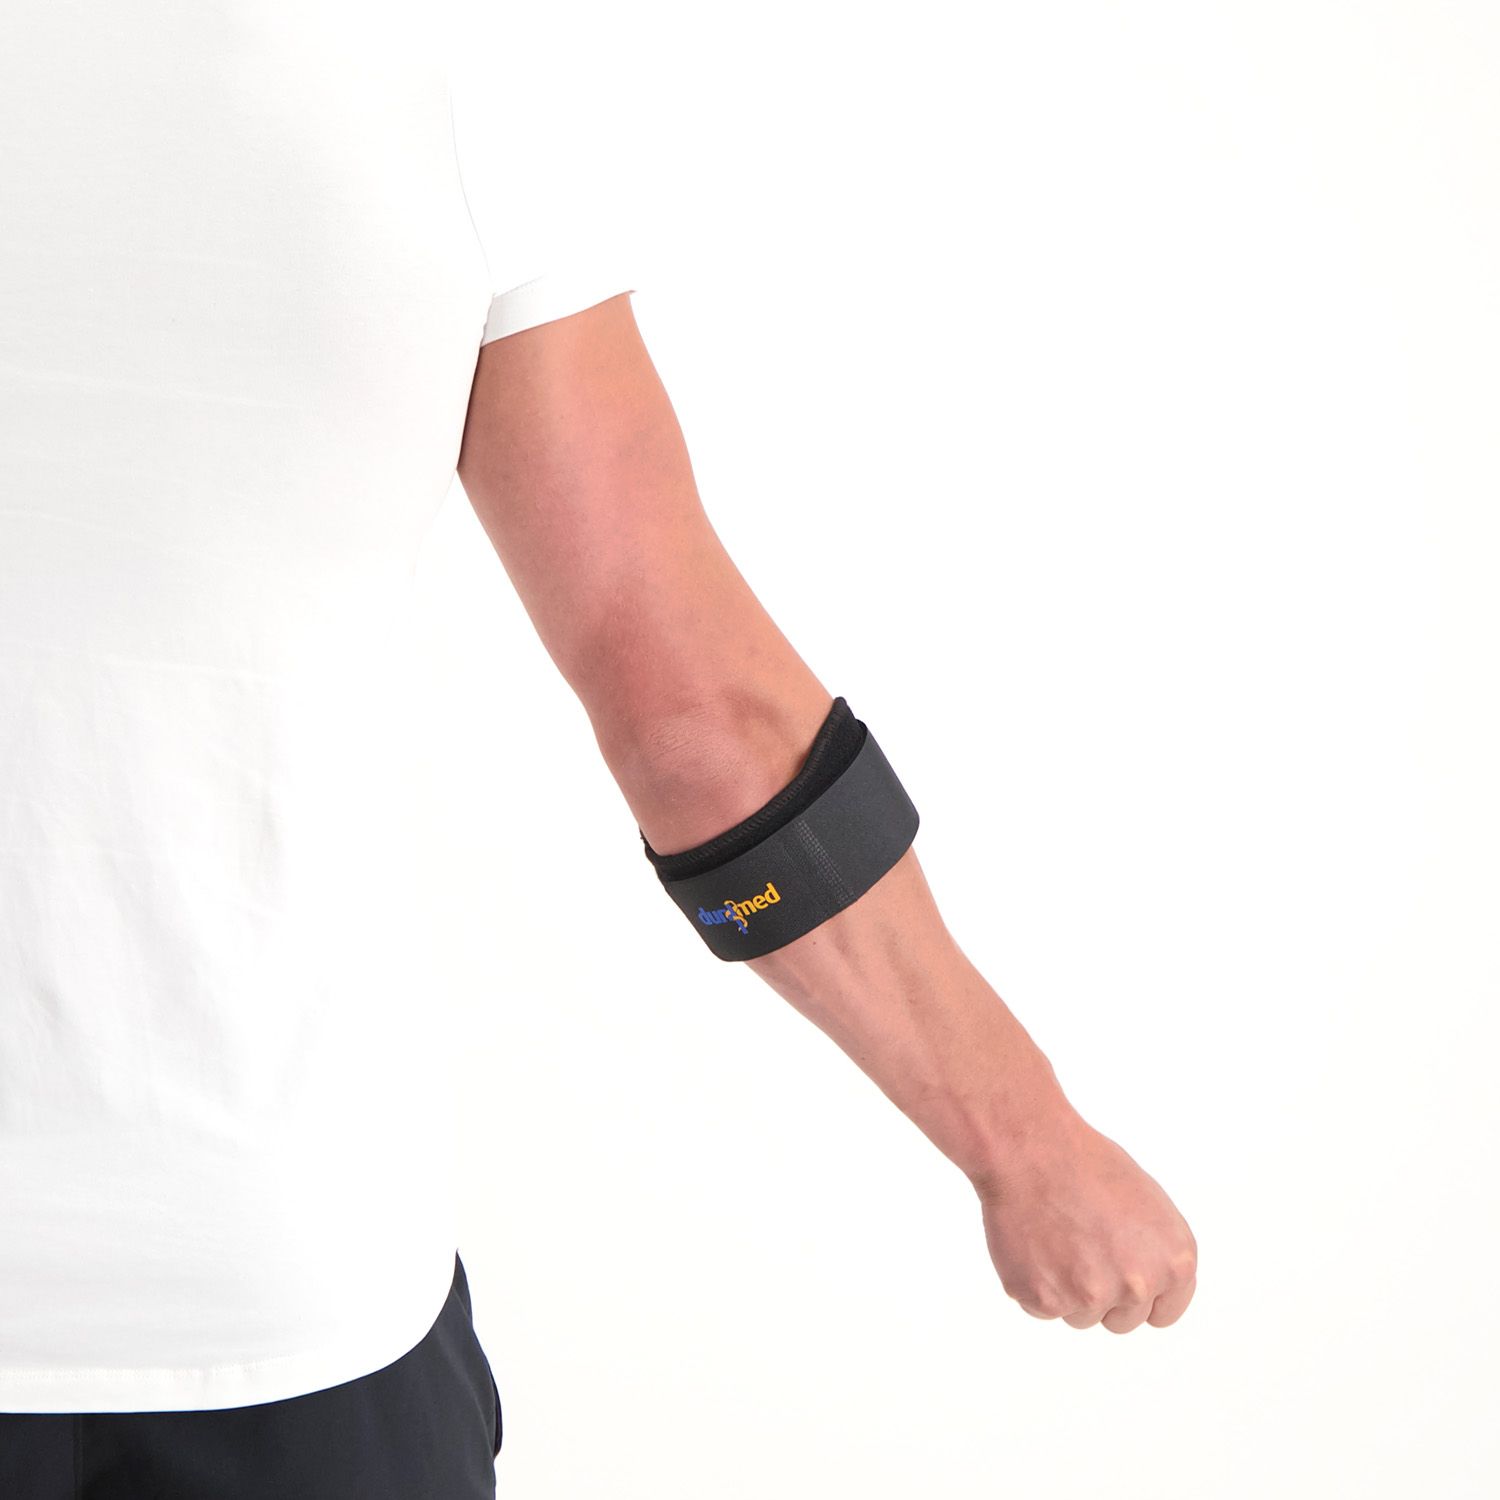 dunimed tennis elbow strap product information